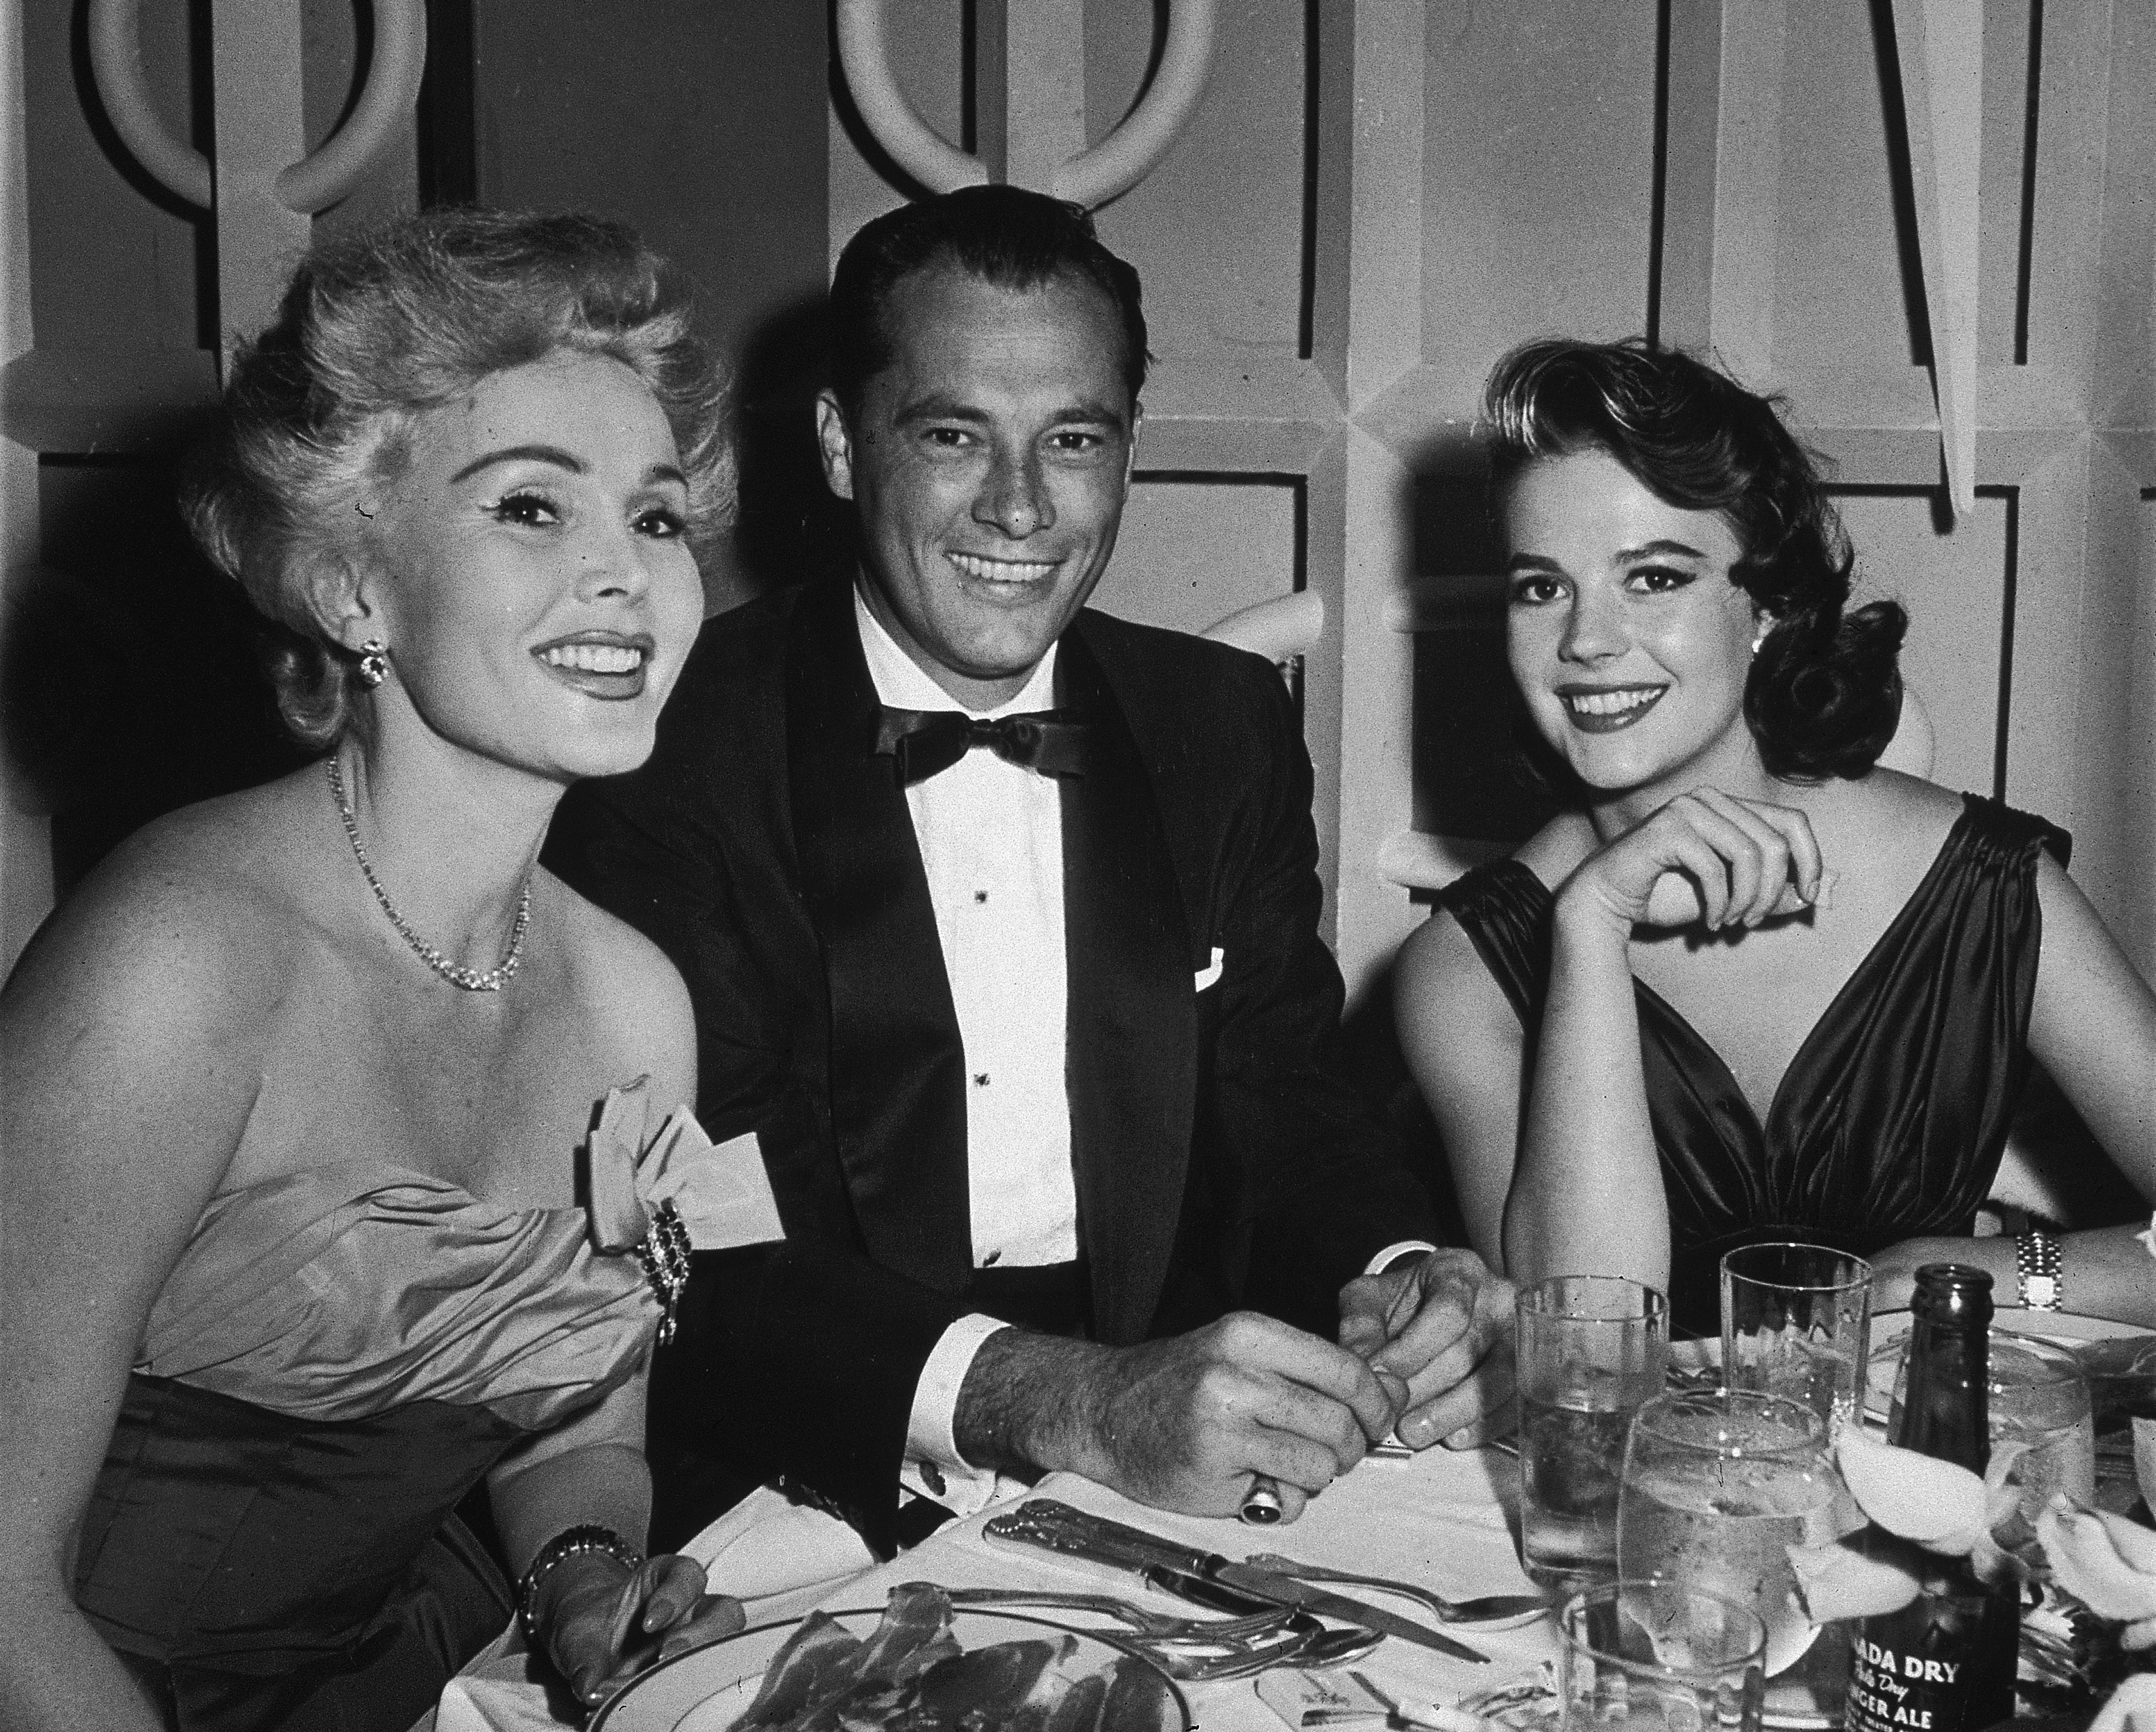 Zsa Zsa Gabor, Conrad "Nicky" Hilton, and Natalie Wood at Mike Romanoff's Restaurant on June 13, 1957. | Source: Bruce Bailey/Getty Images